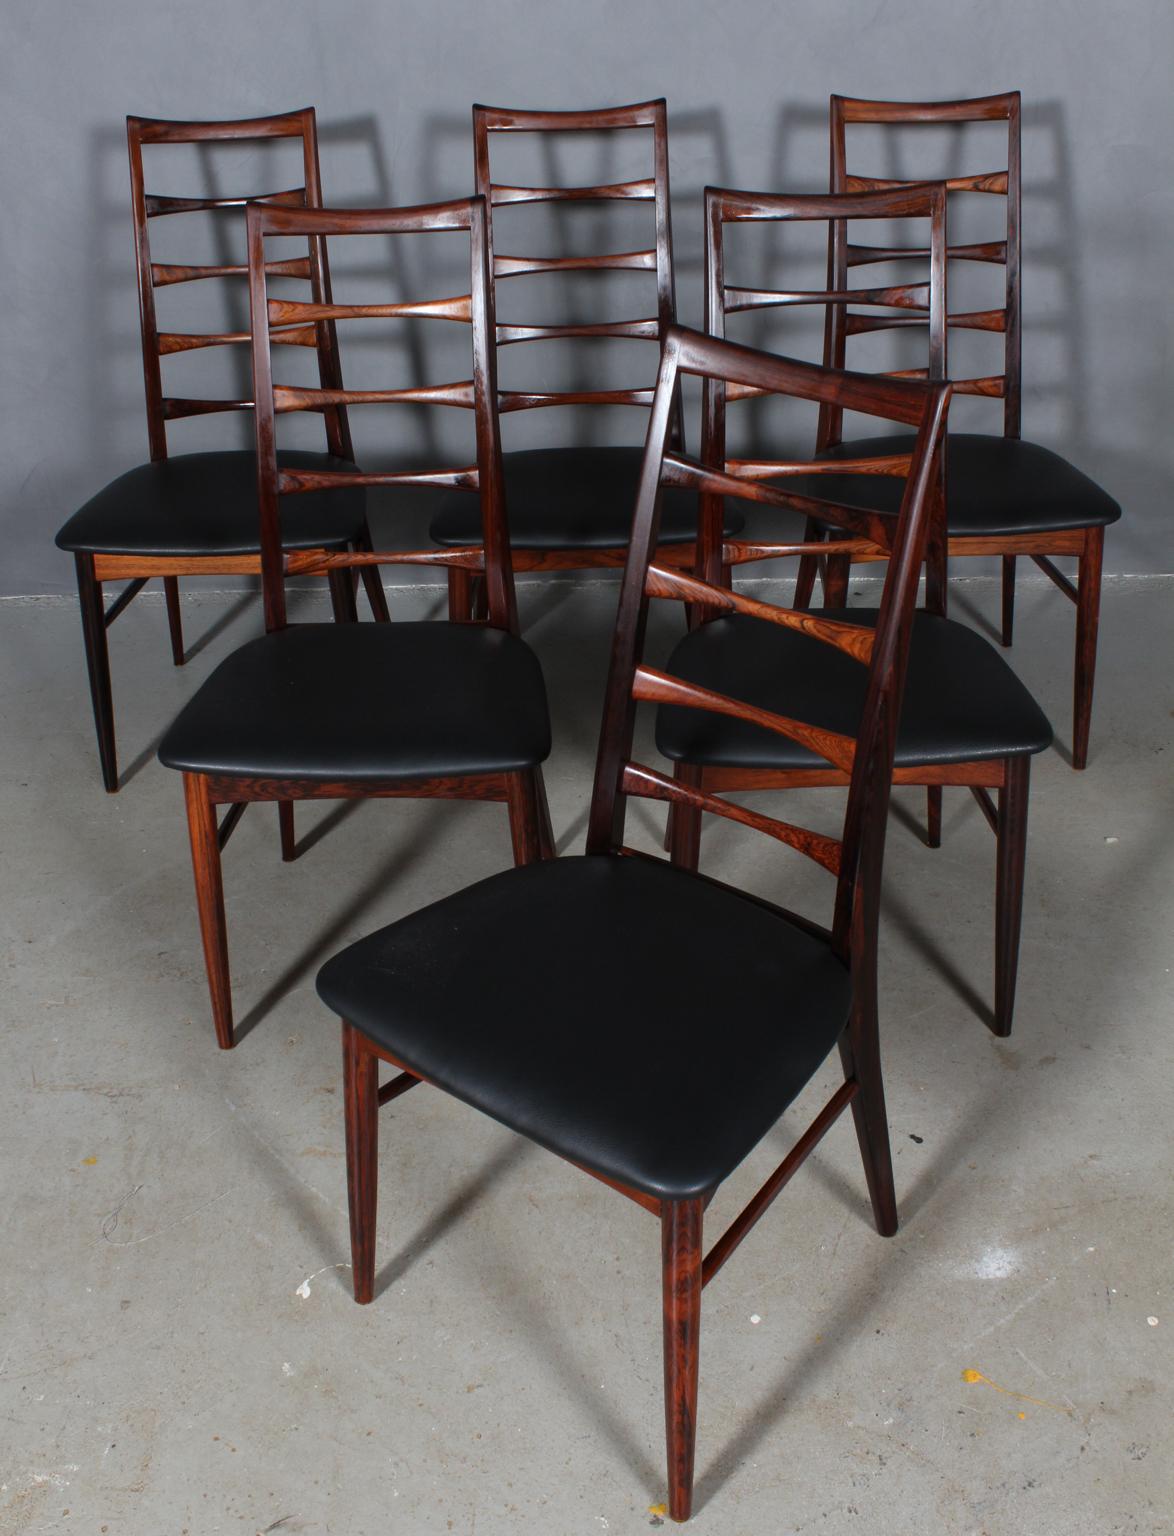 Set of six Niels Koefoed dining chairs made in solid rosewood.

New upholstered in black aniline leather.

Model Lis, made by Niels Koefoeds Møbelfabrik Hornslet, 1960s.

Mathcing armchair available.